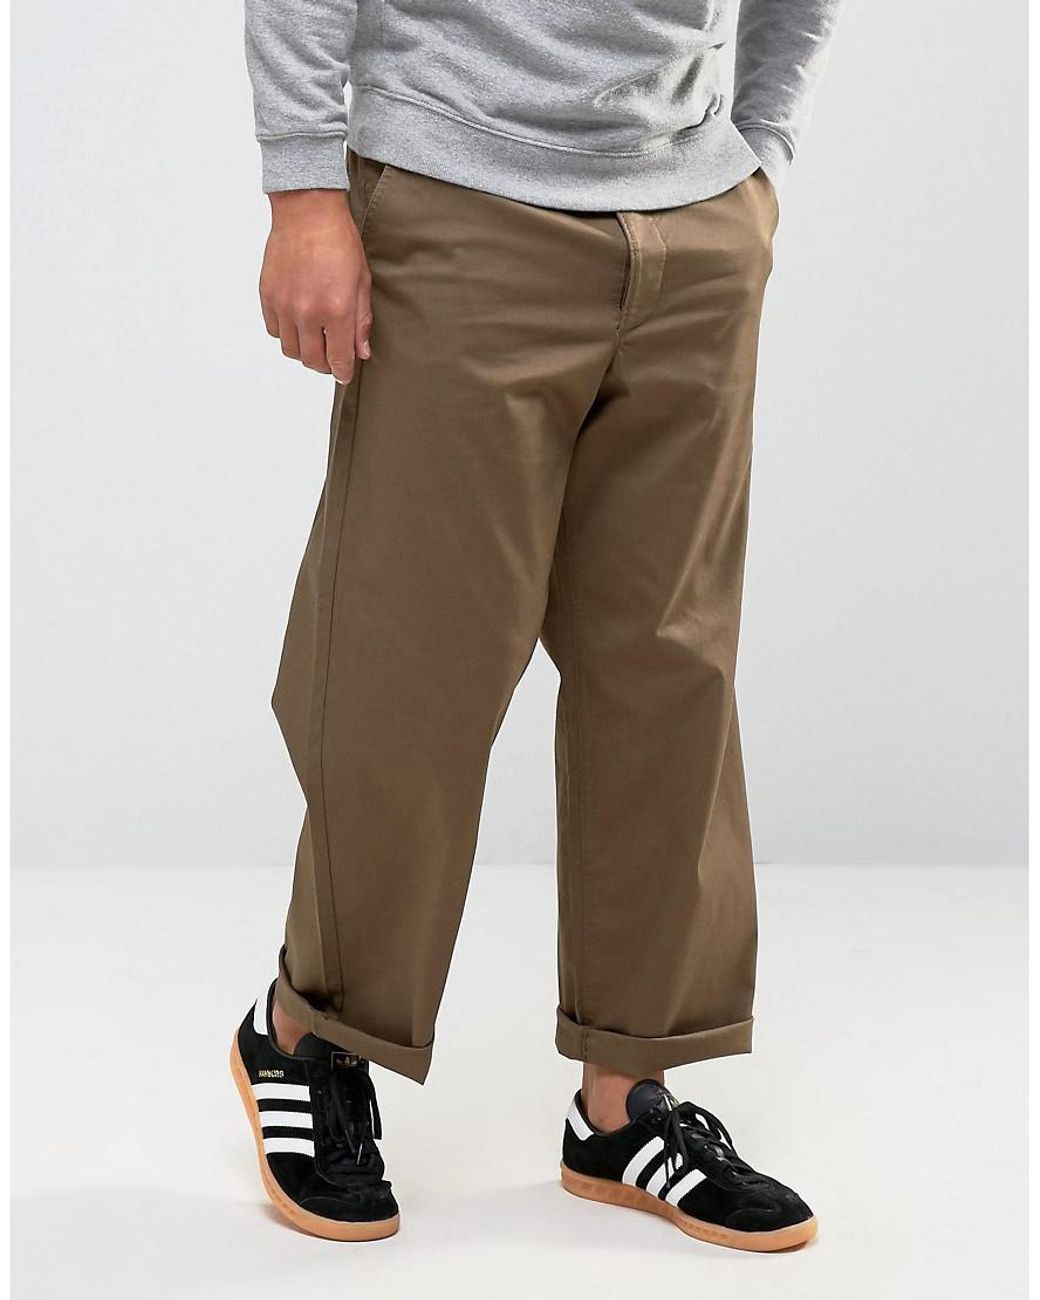 Wide-Leg Khaki Pants Are Back. For Real This Time. - WSJ